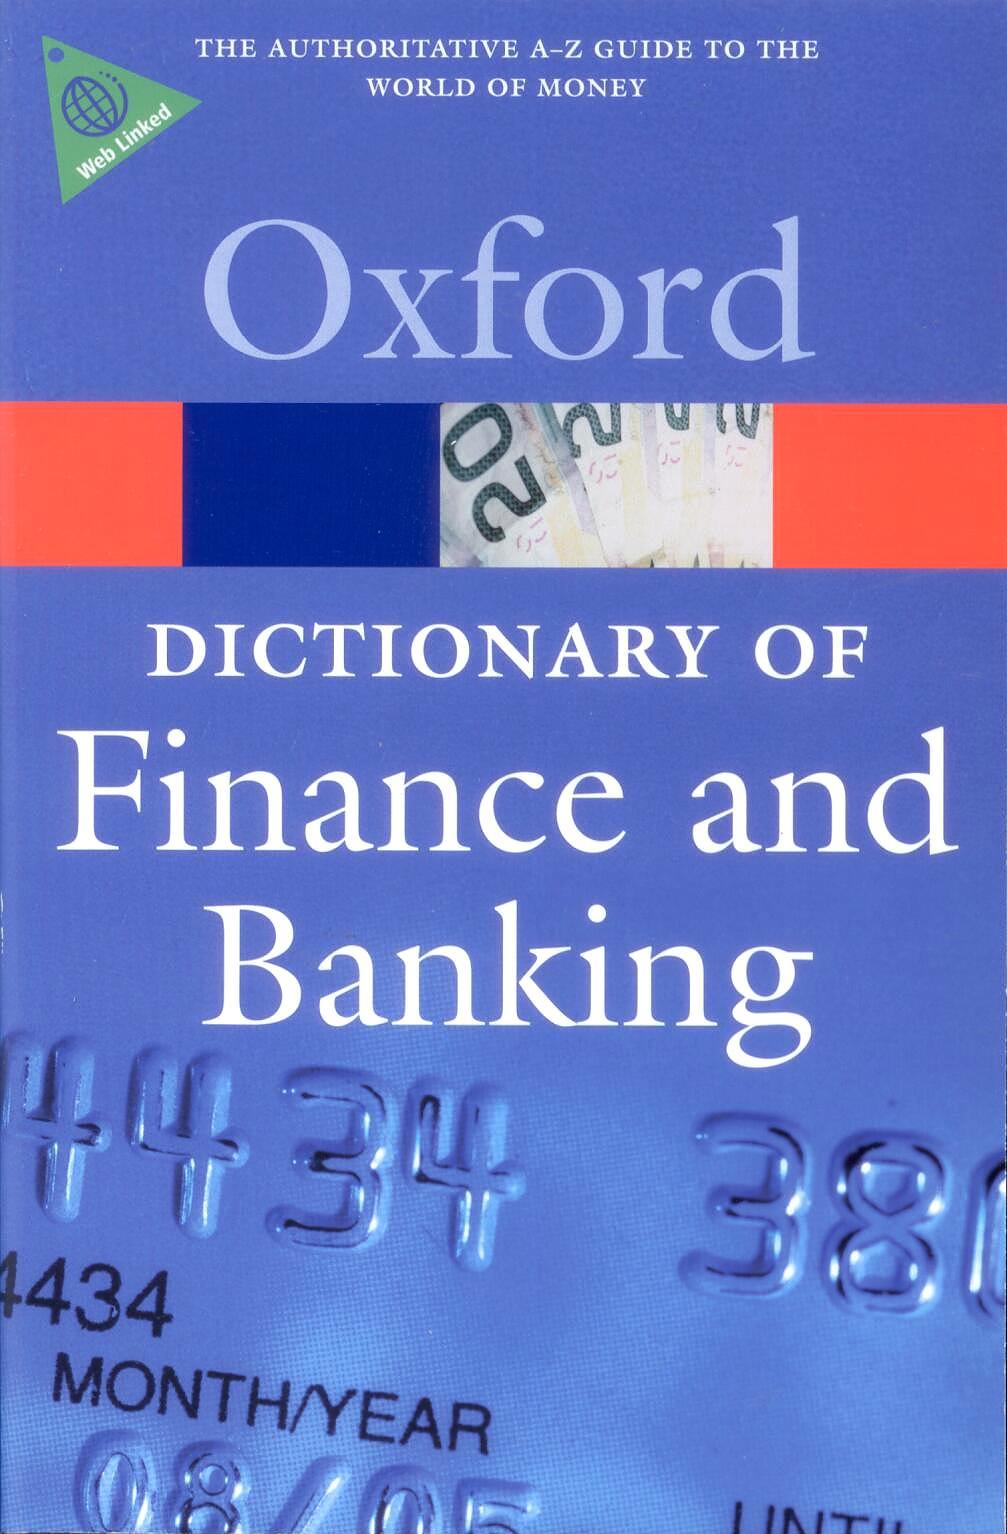 Oxford Dictionary of Finance and Banking (4th Edition)